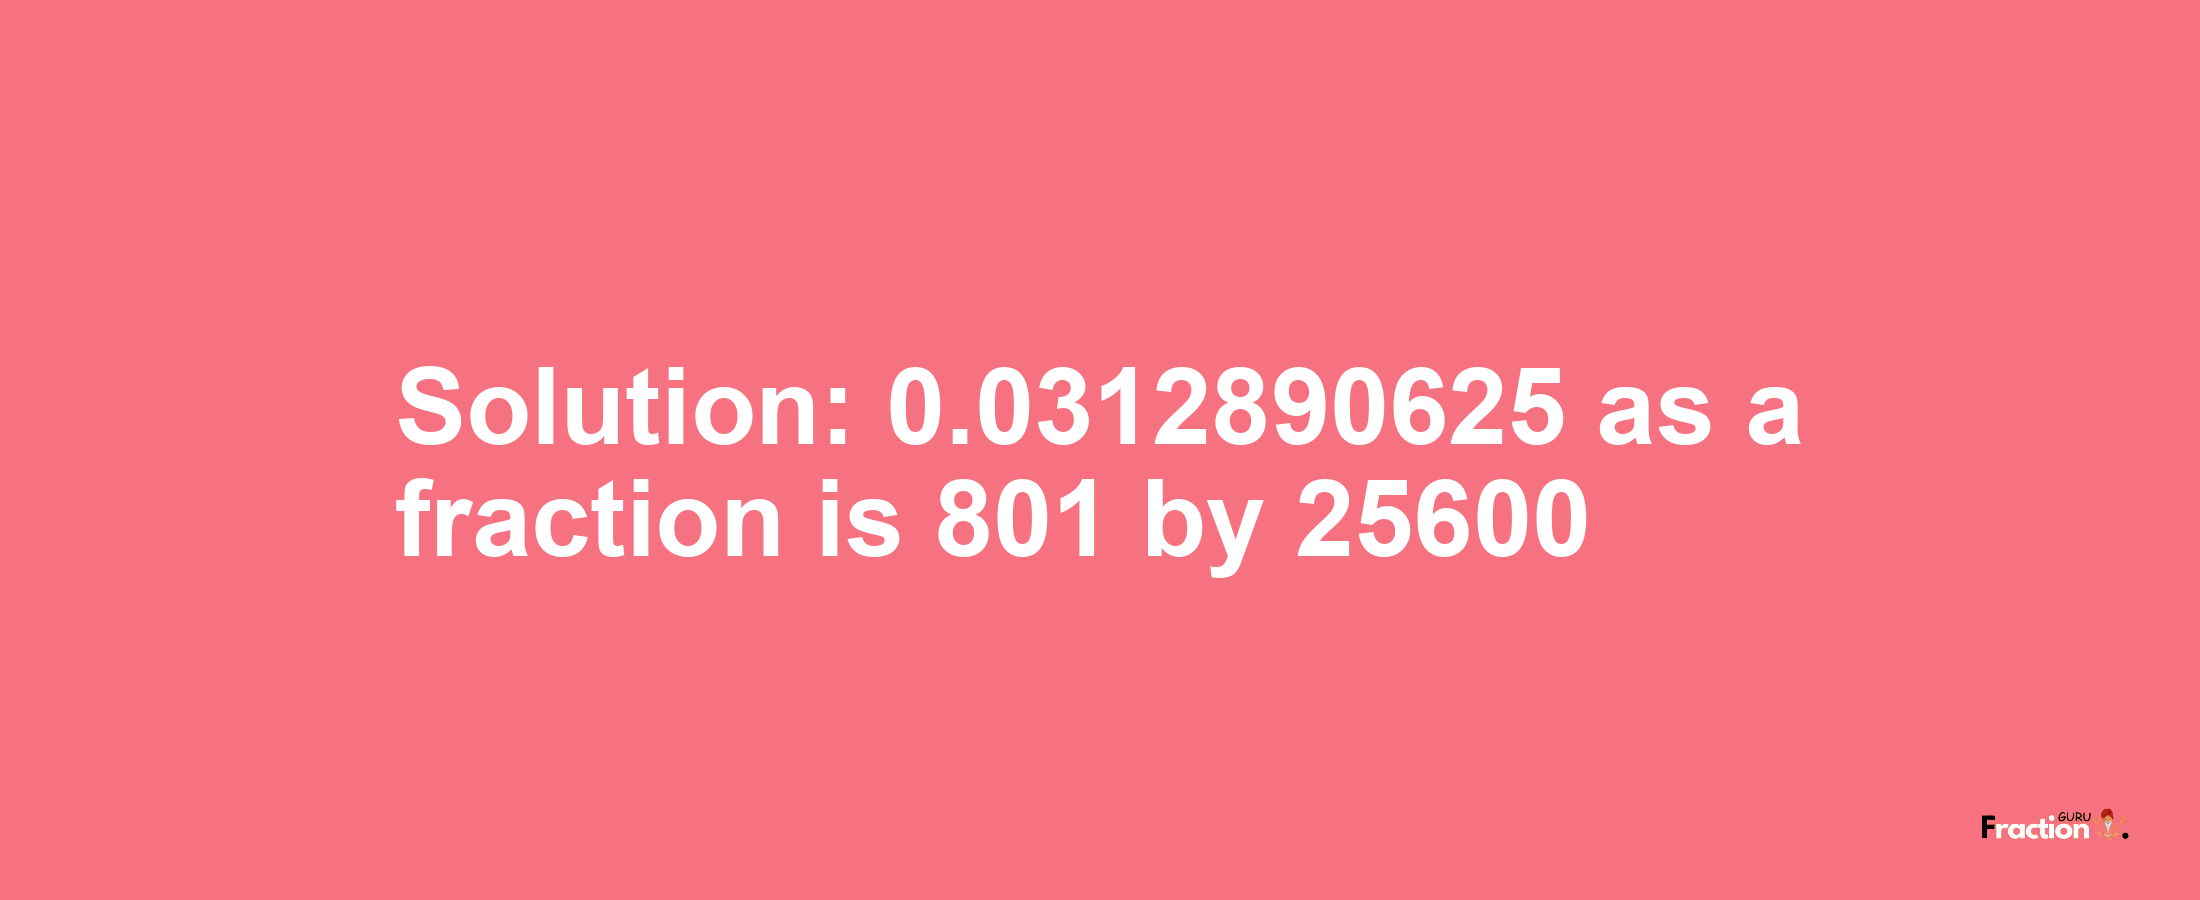 Solution:0.0312890625 as a fraction is 801/25600